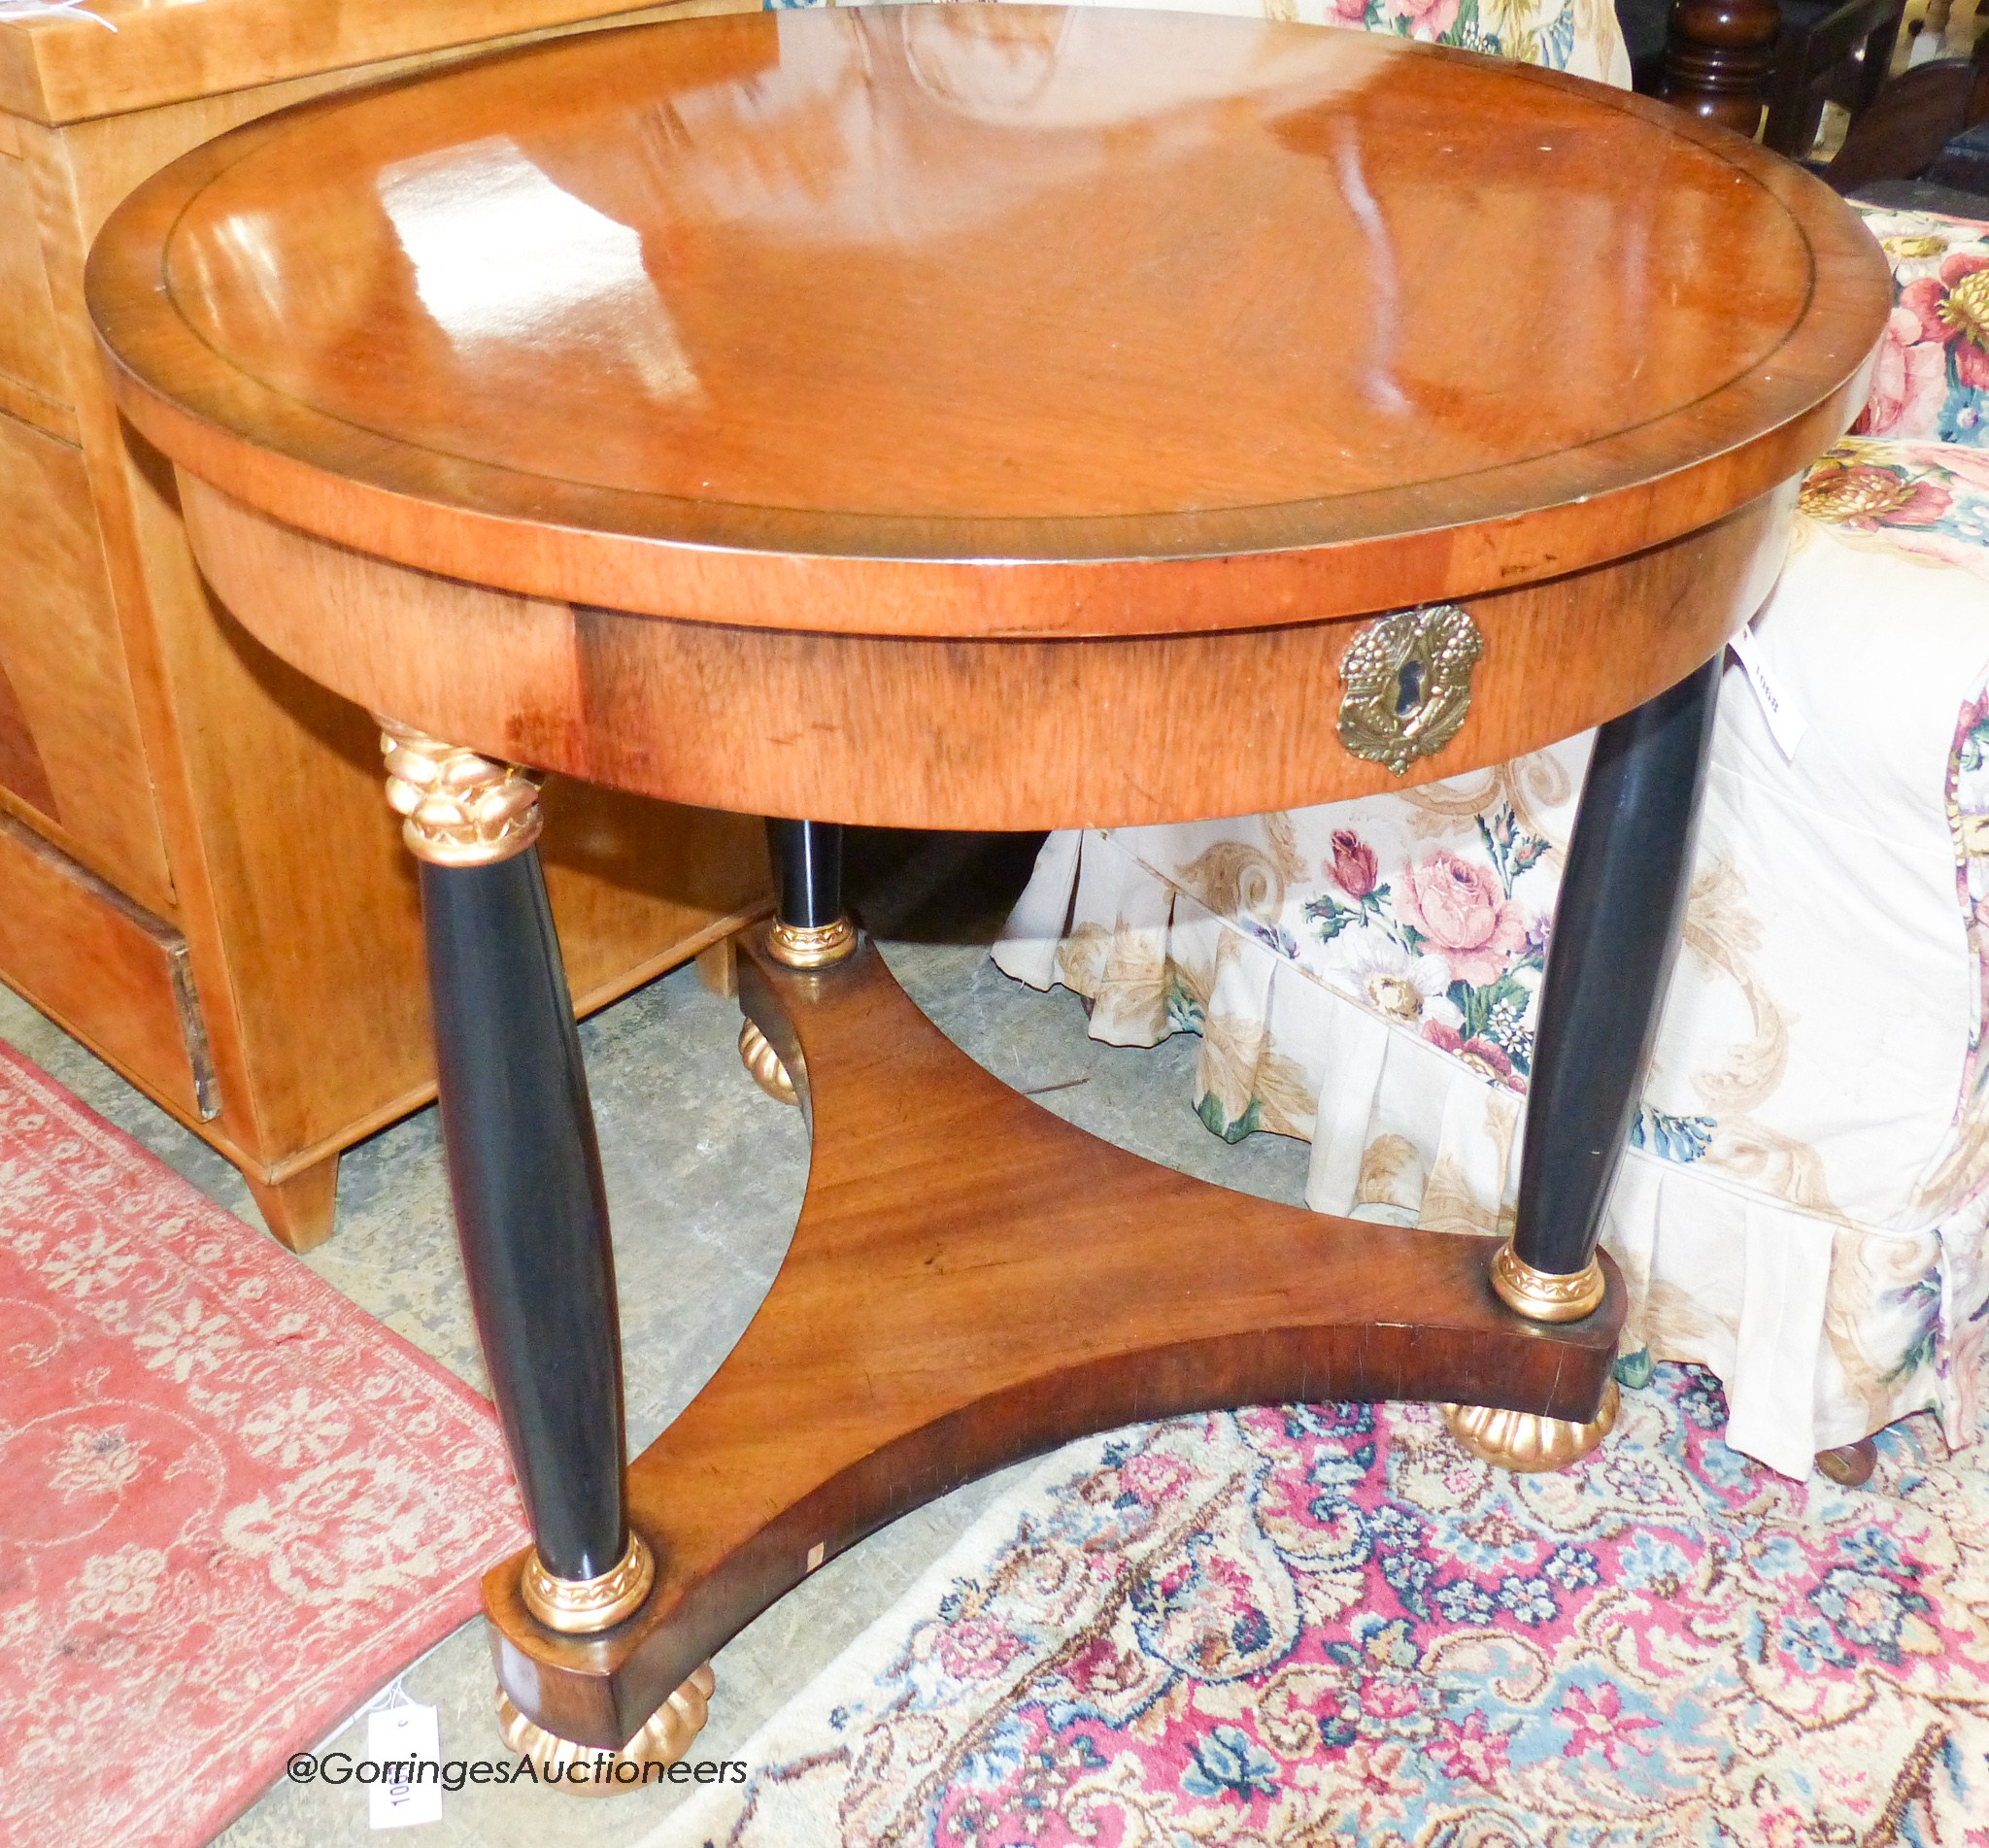 A reproduction French Empire style circular mahogany centre table, diameter 76cm, height 73cm